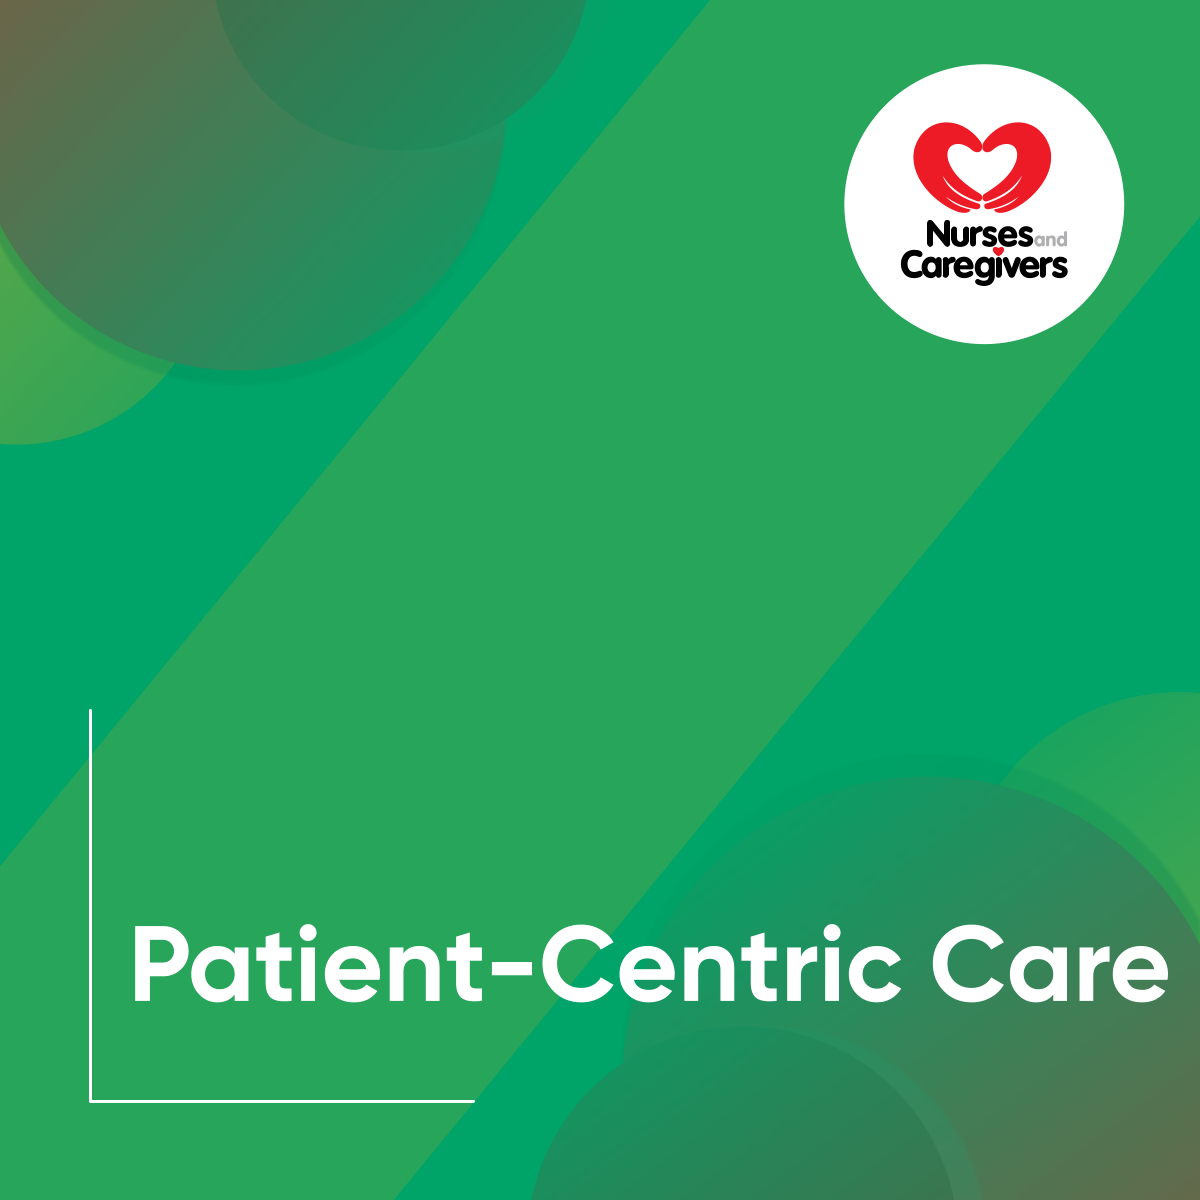 We prioritize your comfort, safety, and well-being. That is why we make sure that we tailor our care depending on your needs and preferences. We also make sure that we maintain open communication, active listening, and a collaborative approach with you.

#PatientCentricCare